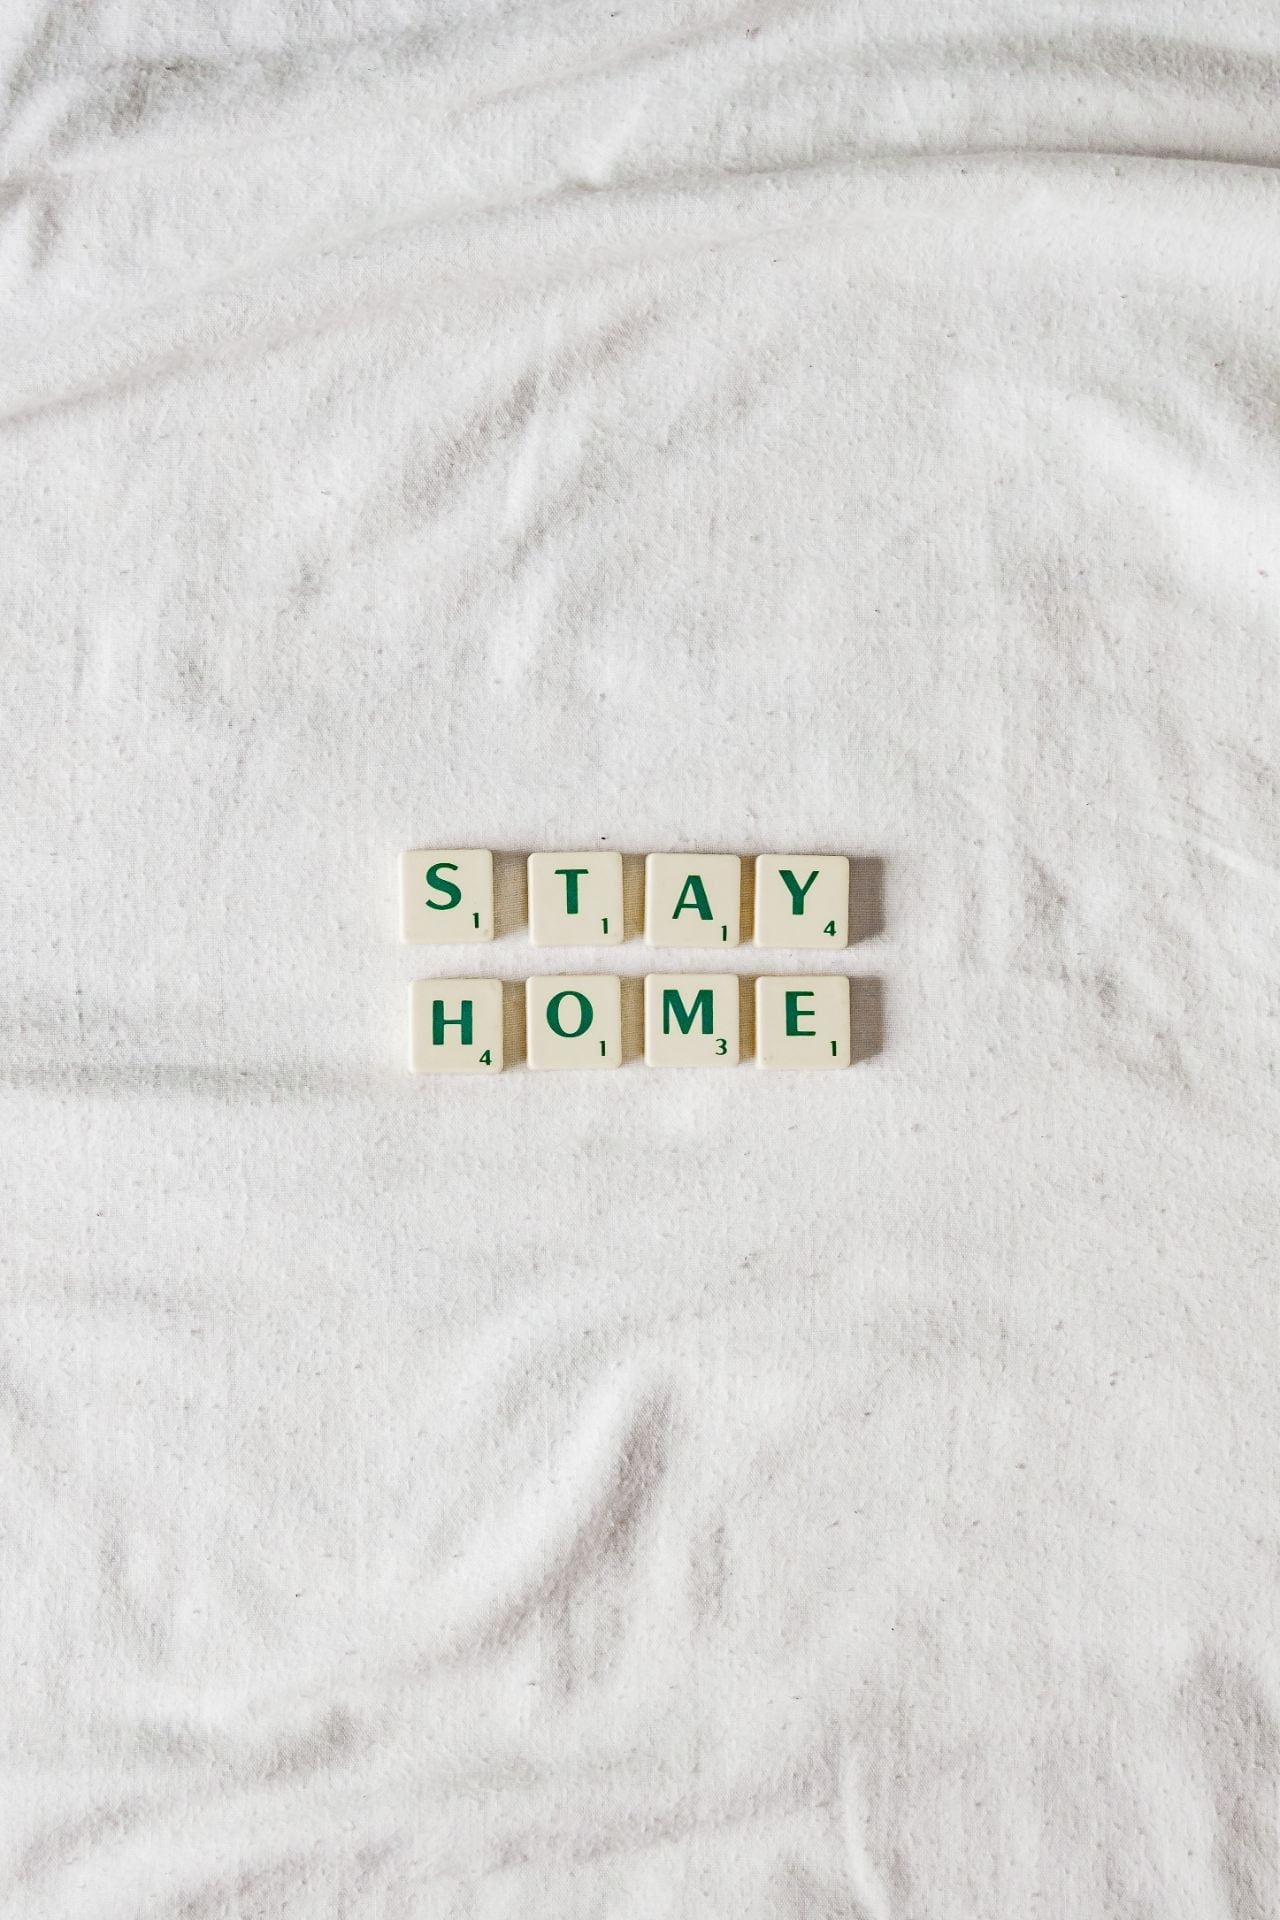 scrabble letters reading the words: stay home